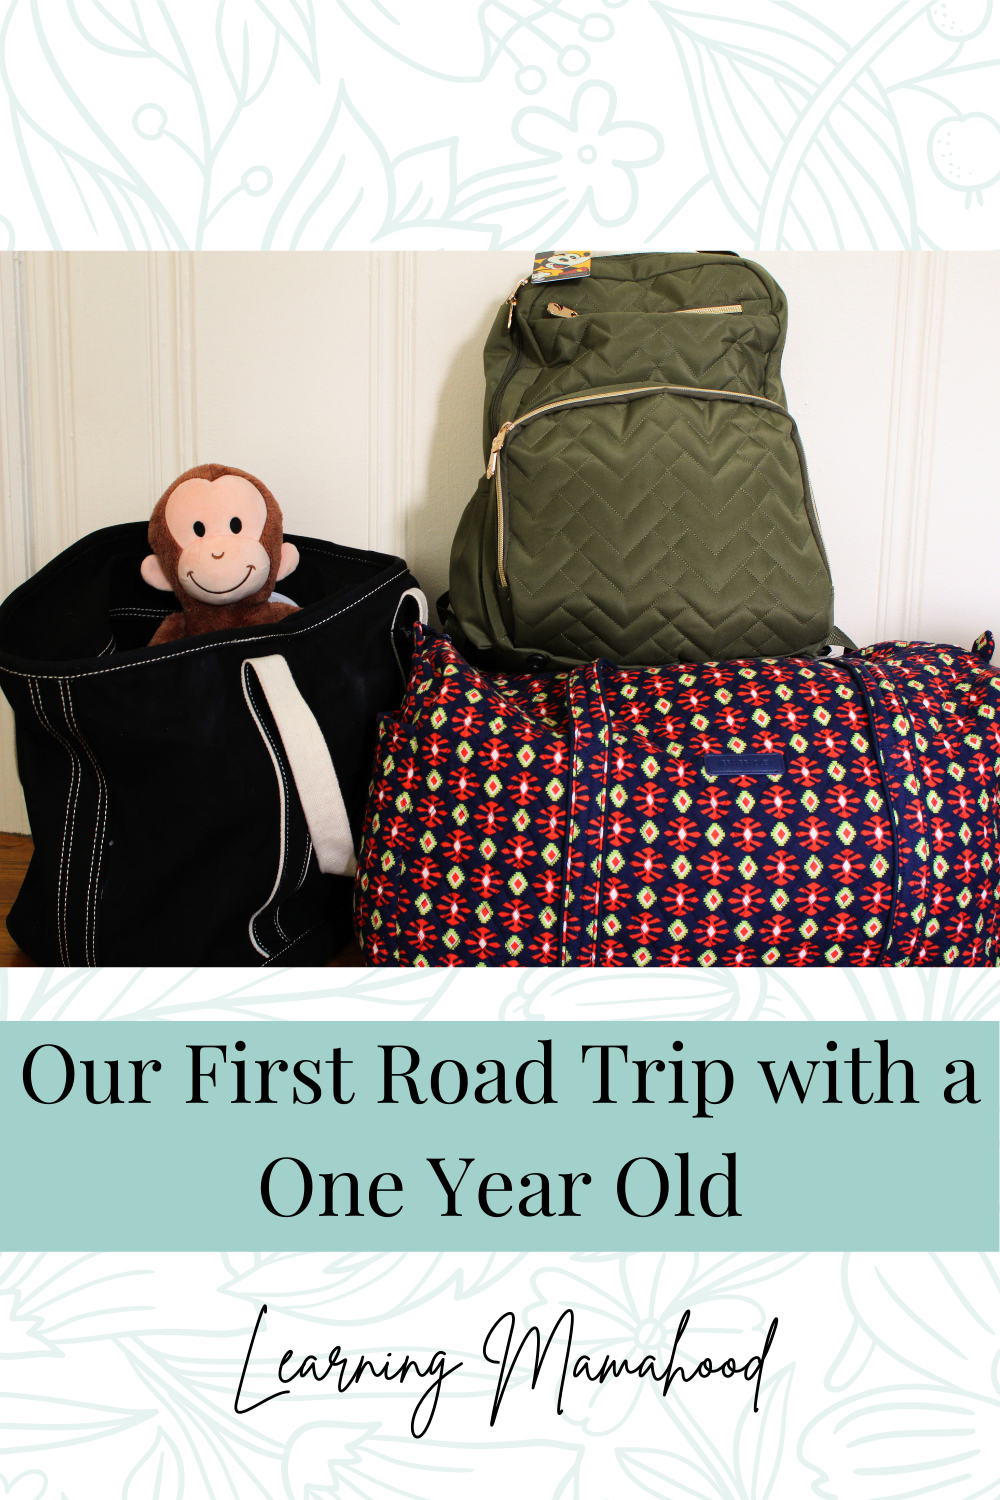 Our First Road Trip with a One Year Old